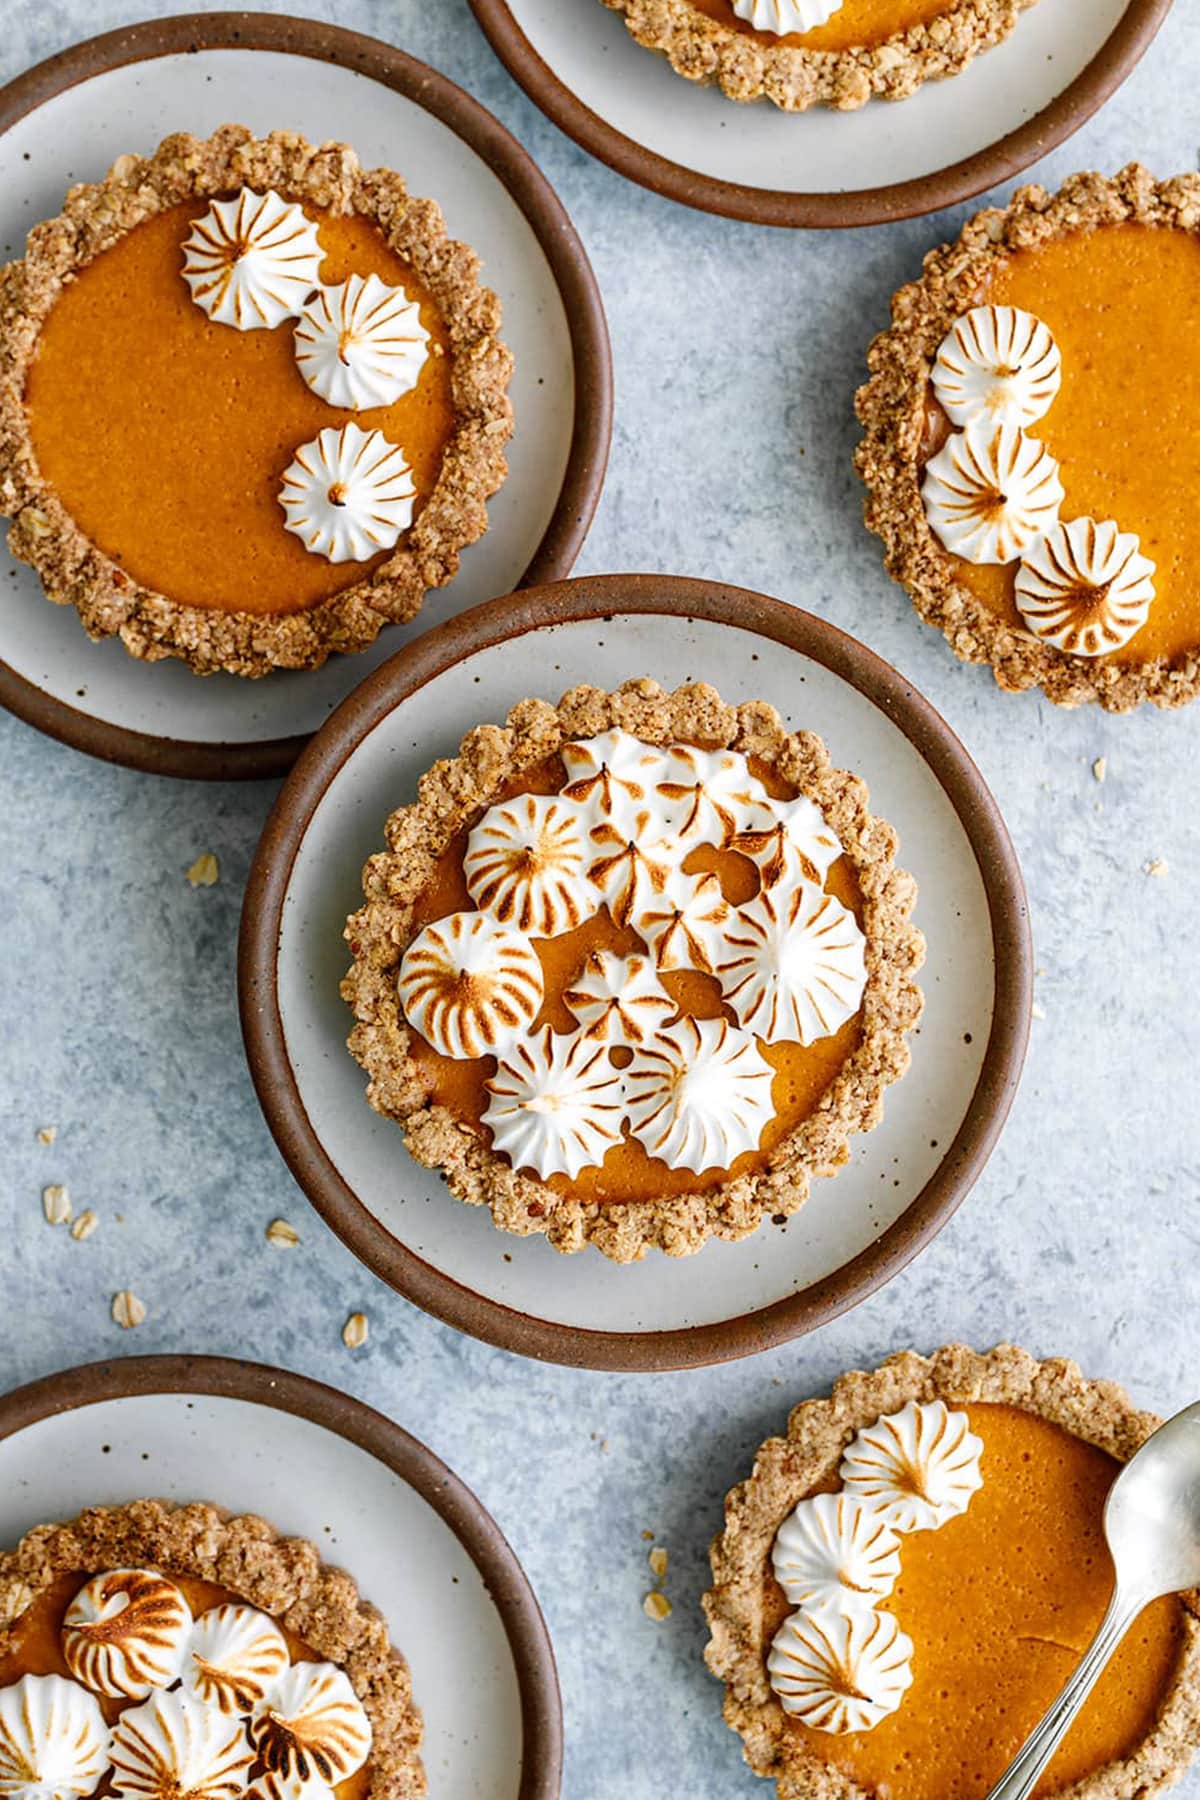 Mini Pumpkin Tarts bursting with fall flavors that are so simple to make and so good. Made with a gluten-free crust and a creamy pumpkin spice filling. Topped with toasted meringue.